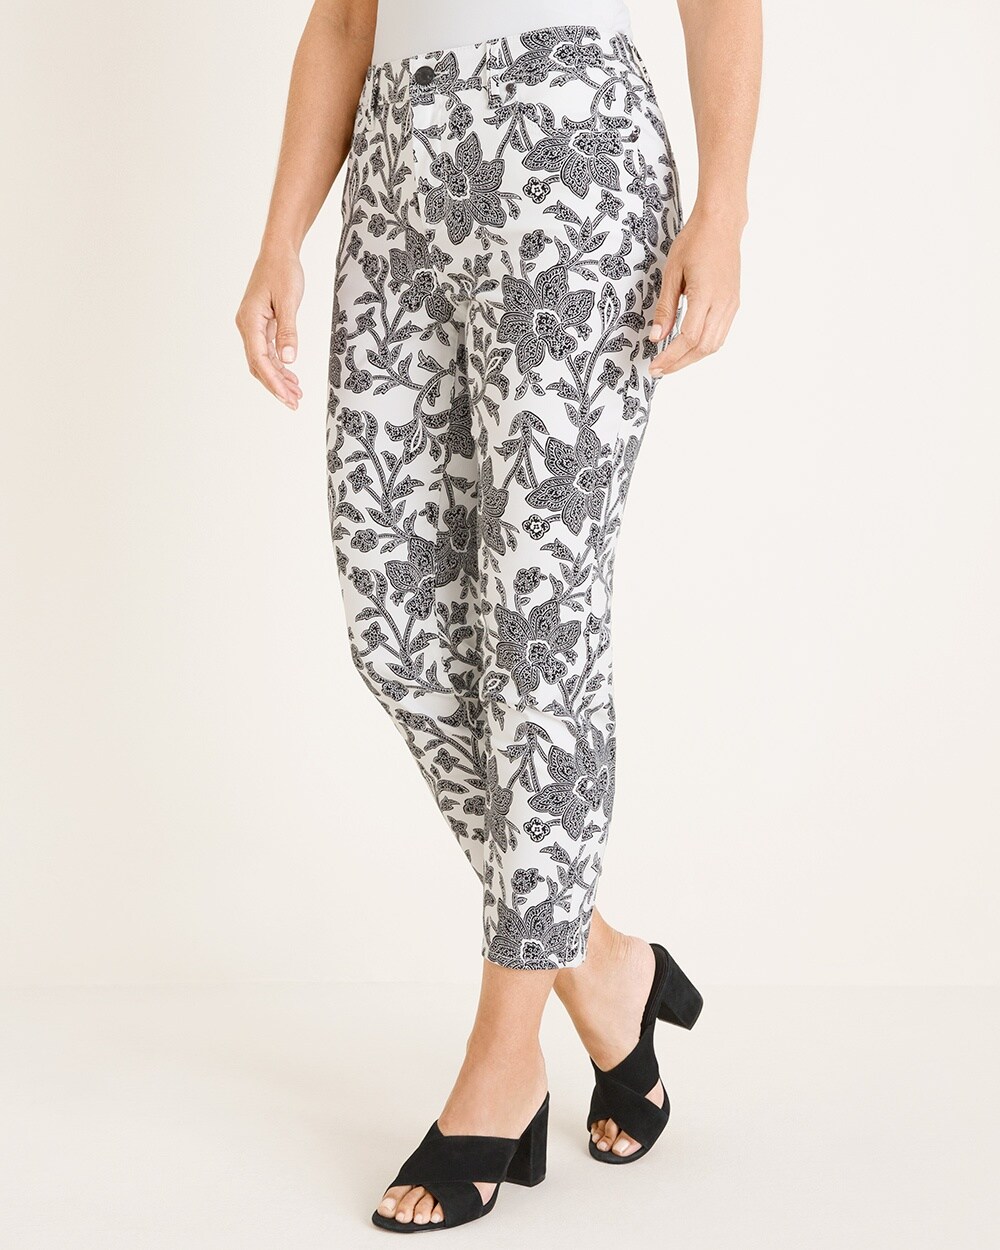 Sateen Black and White Floral Crops